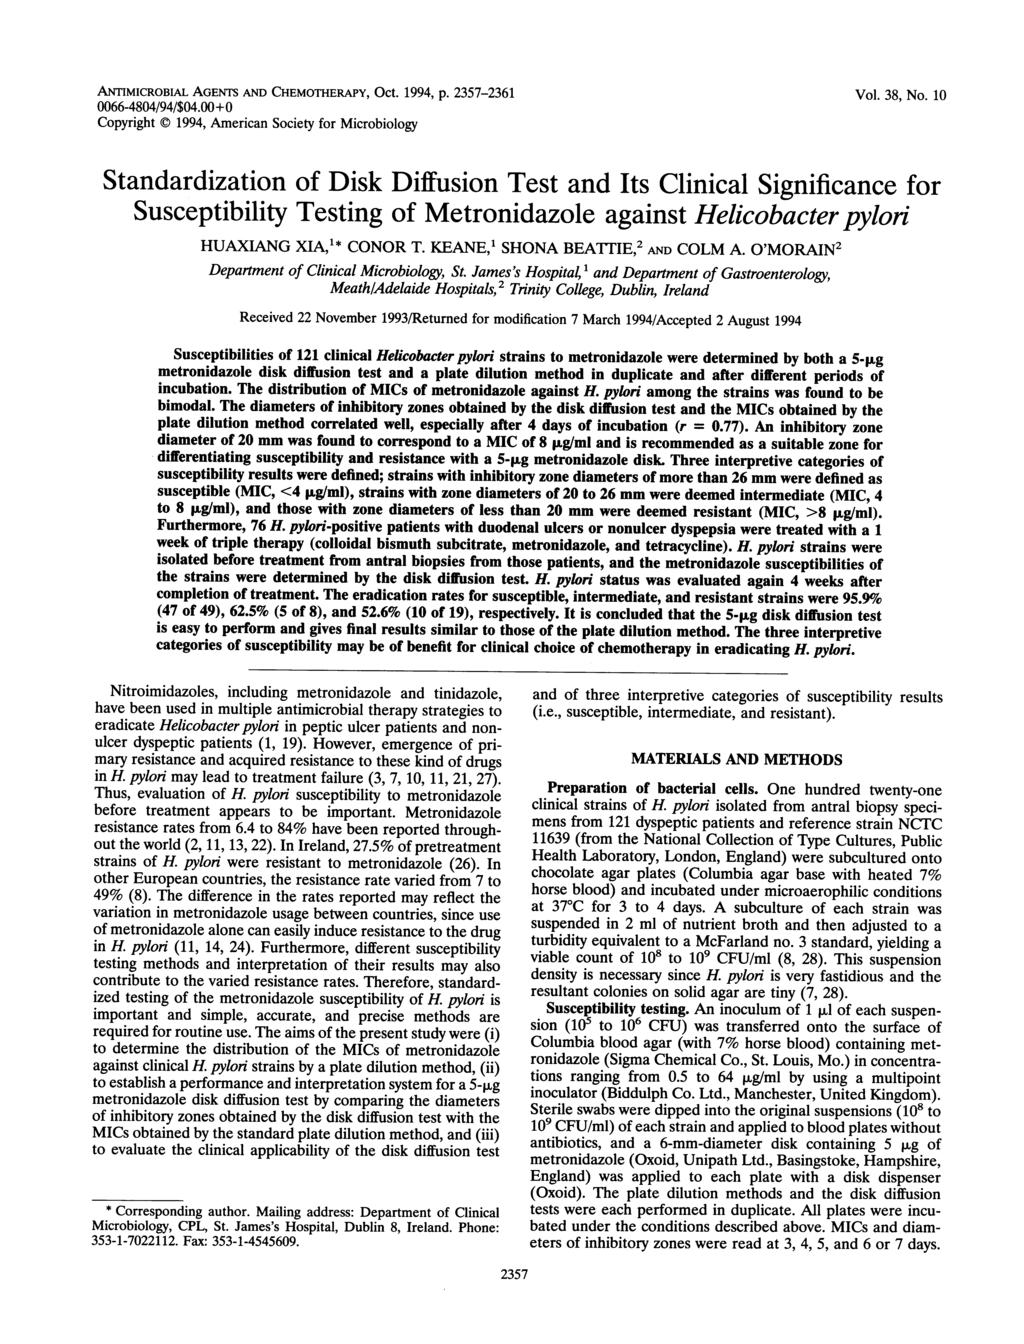 ANTIMICROBiAL AGENTS AND CHEMOTHERAPY, OCt. 1994, p. 2357-2361 66-484/94/$4.+ Copyright 1994, American Society for Microbiology Vol. 38, No.